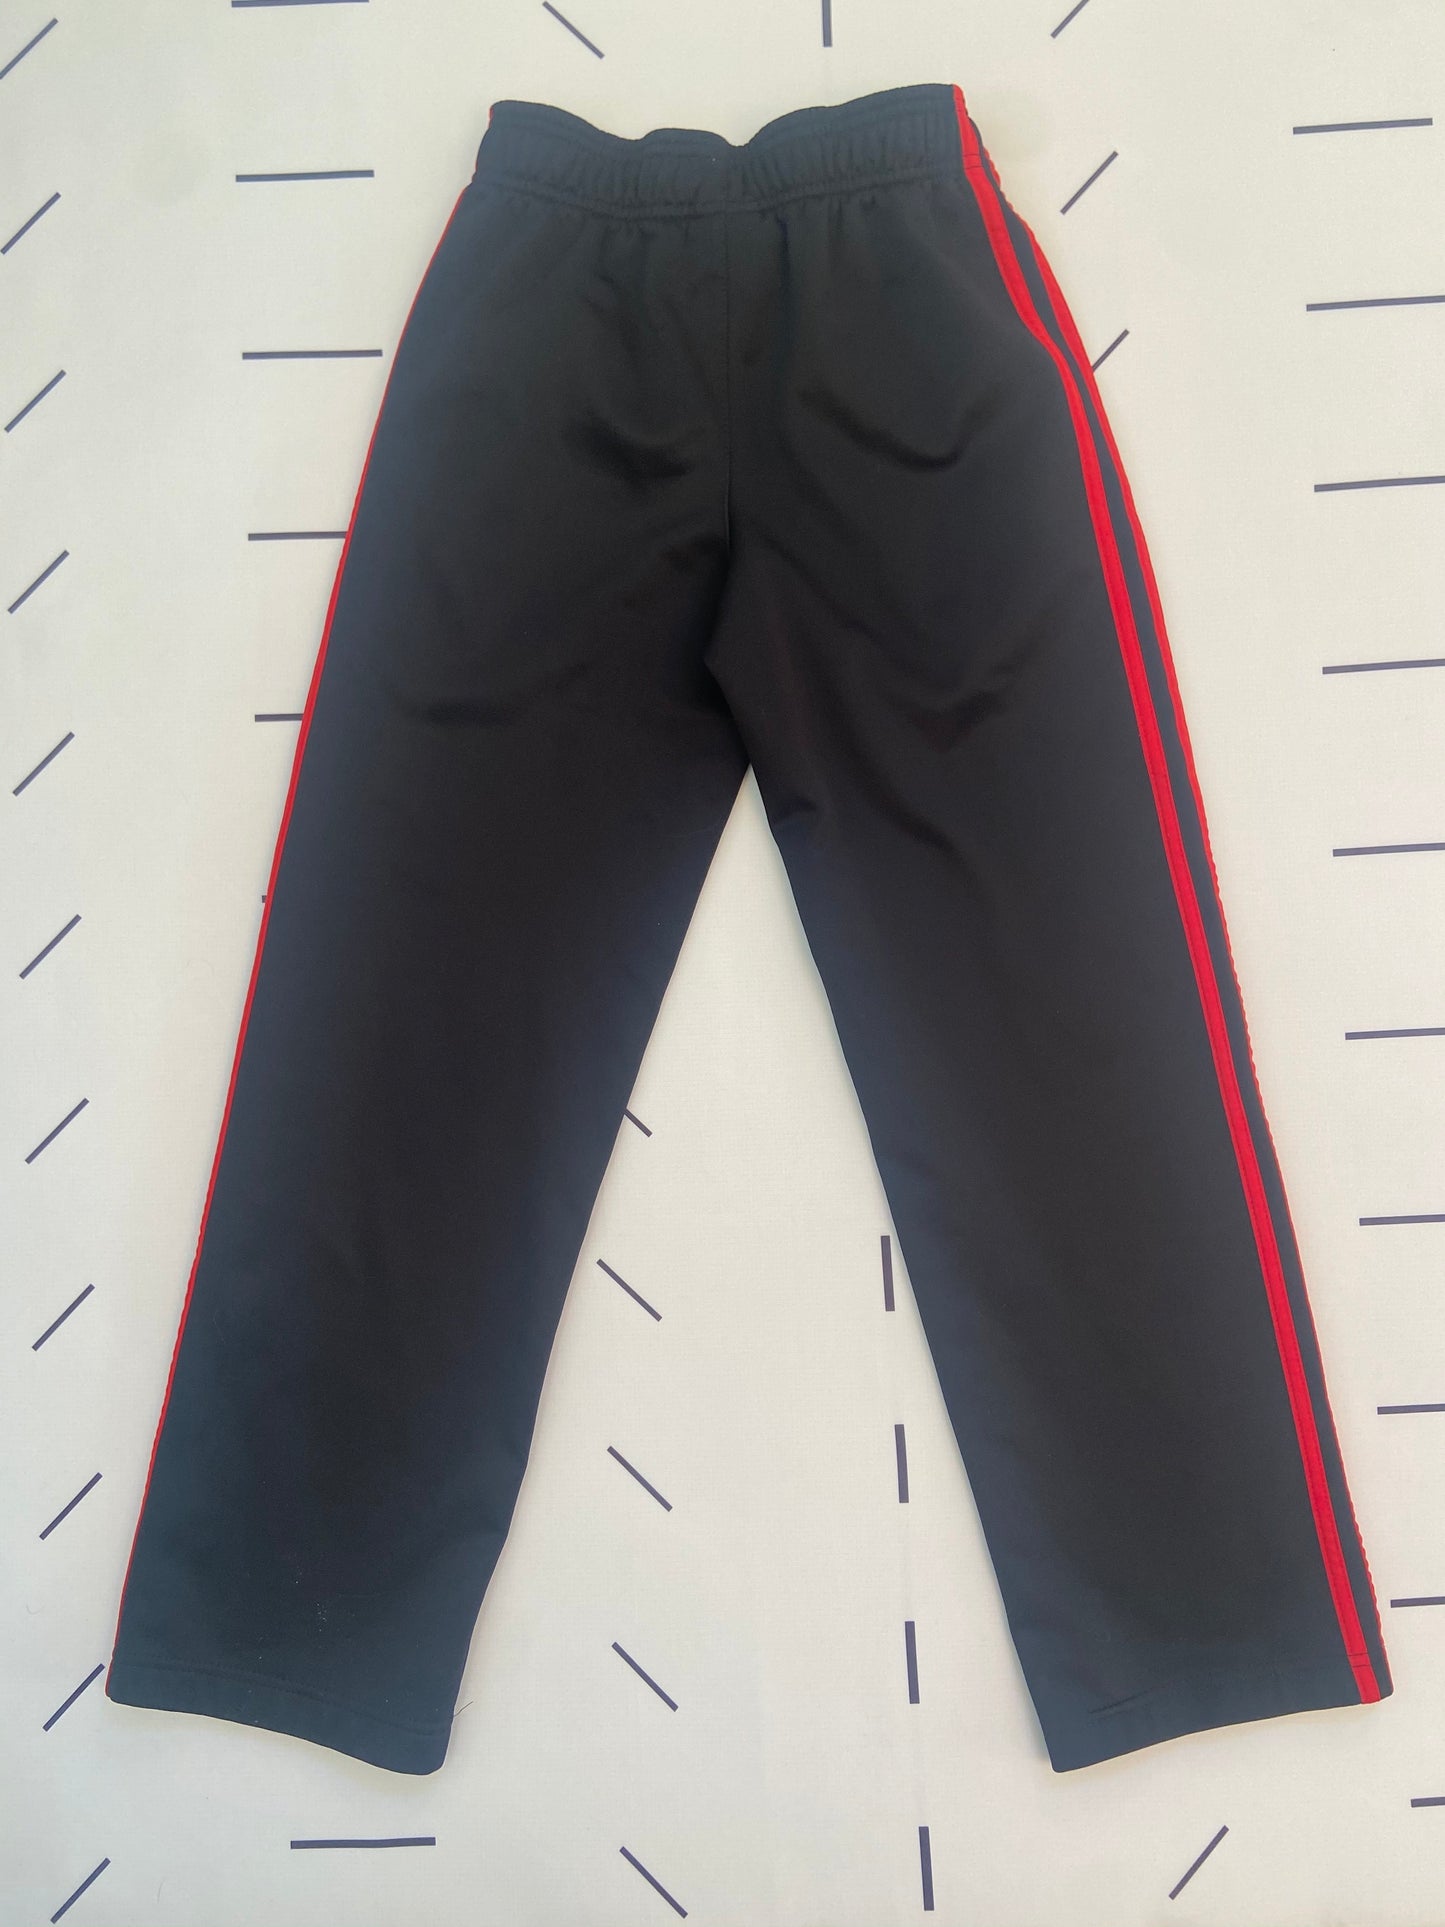 Boy's Athletic Pants - Youth M